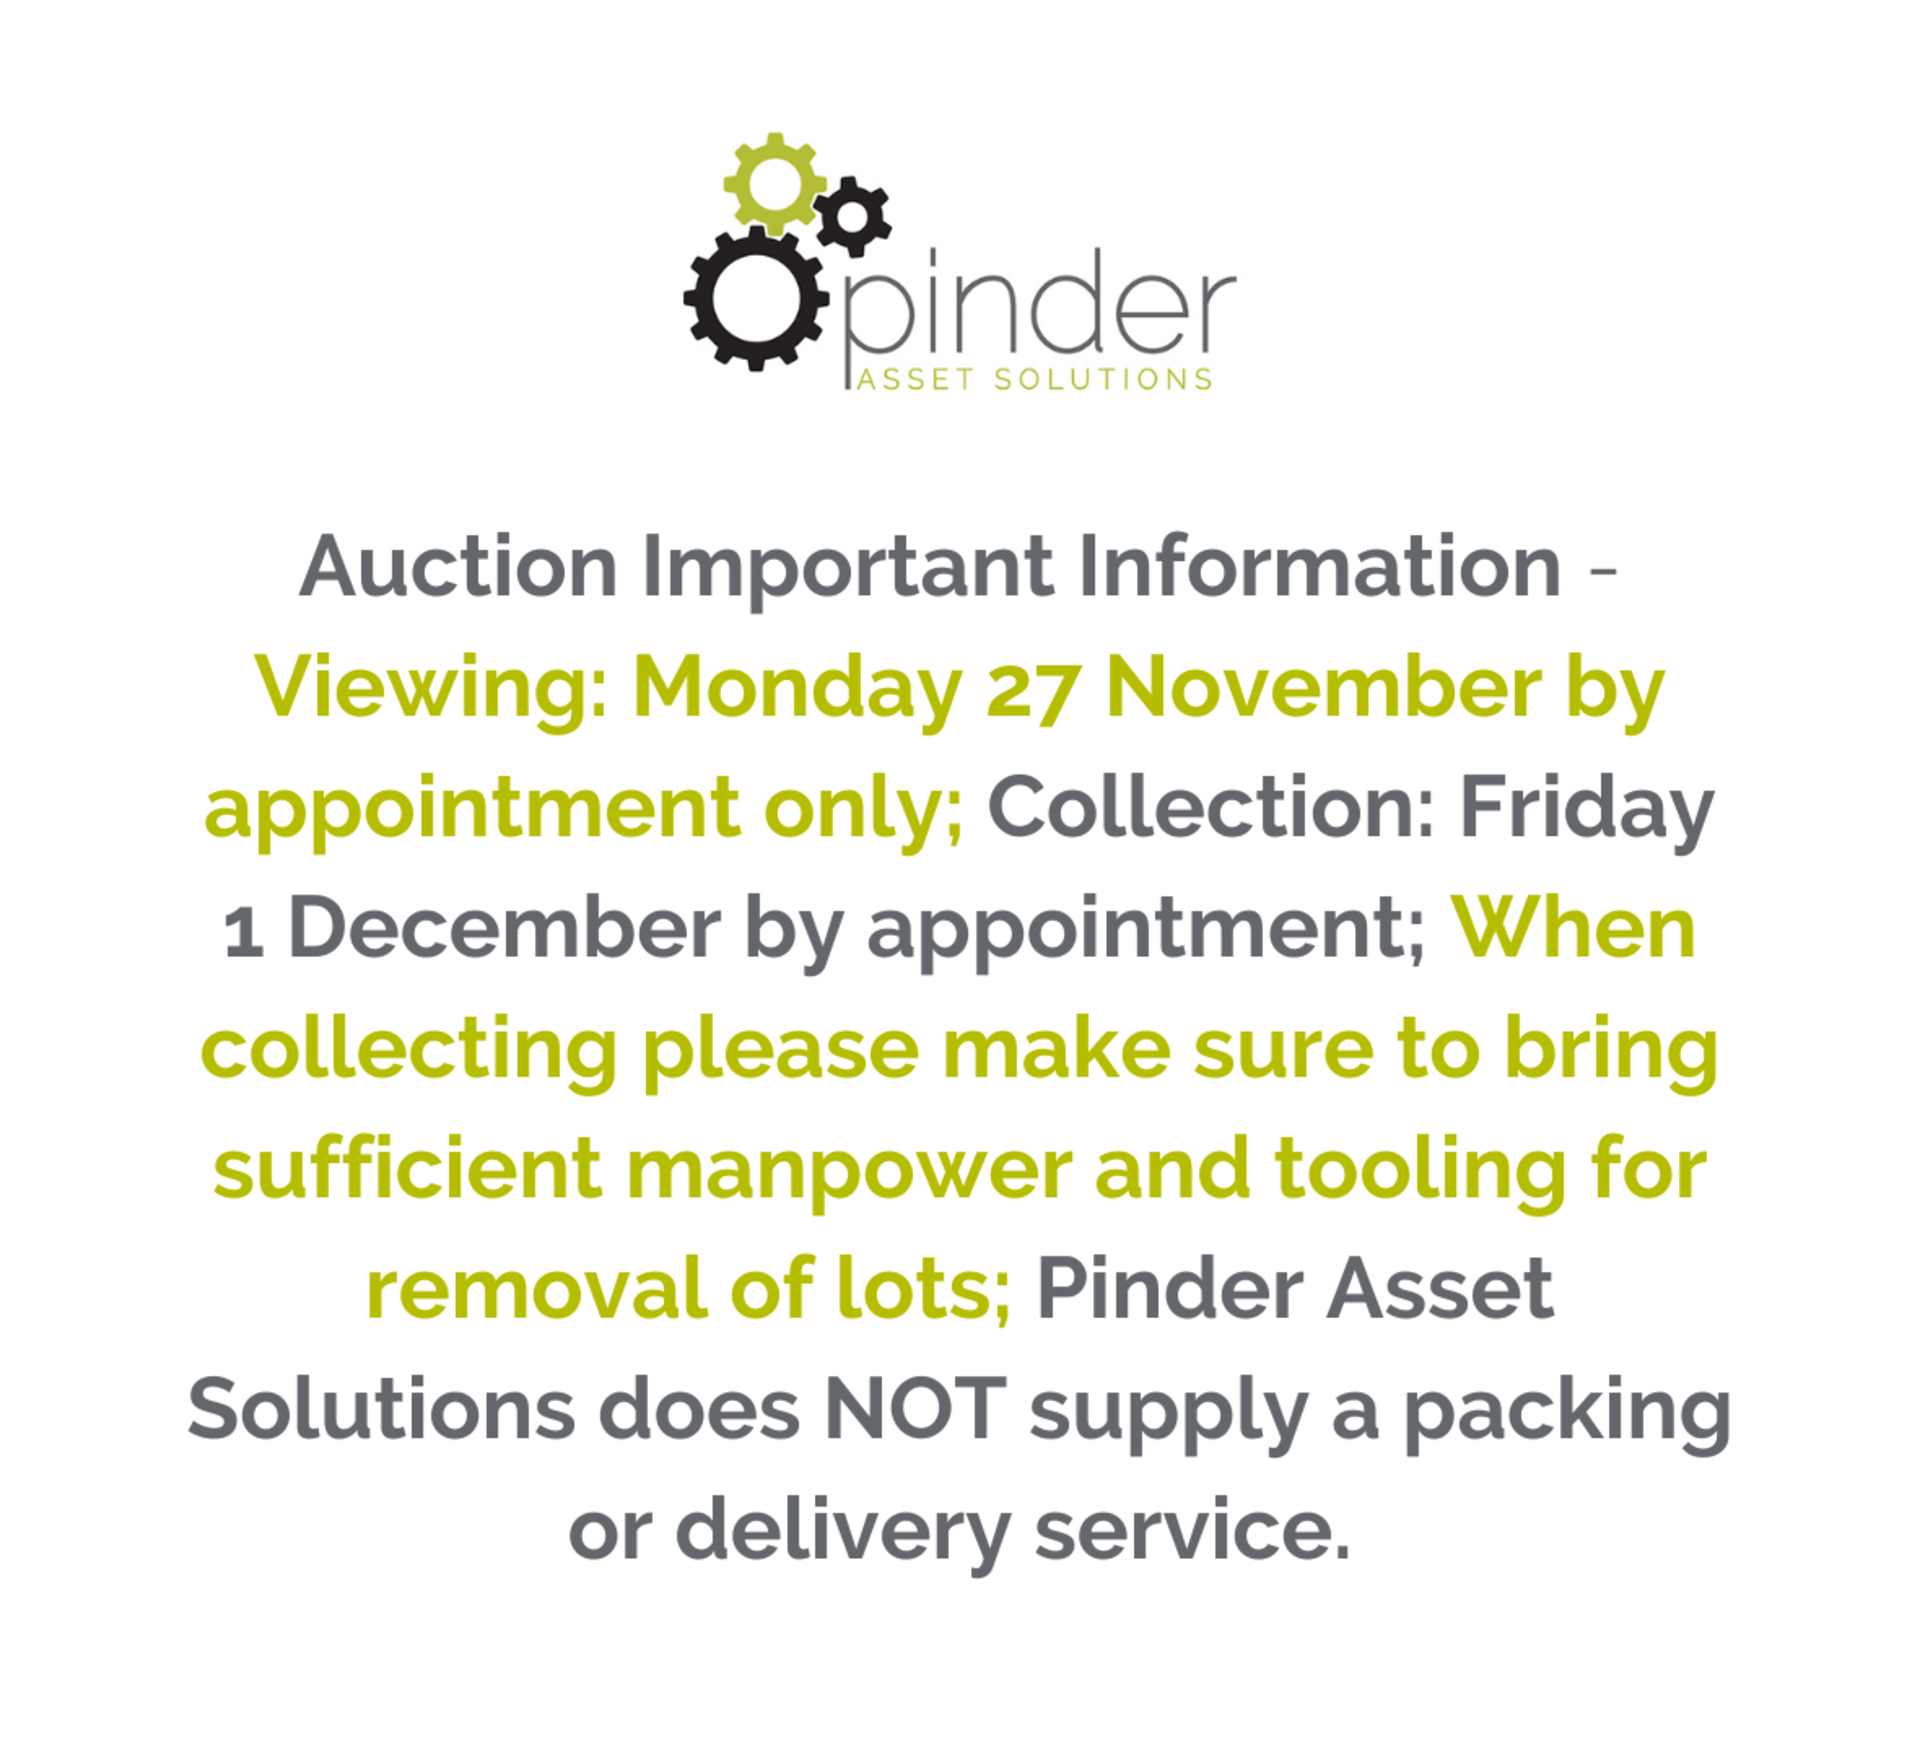 Auction Important Information - Viewing: Monday 27 November by appointment only; Collection: